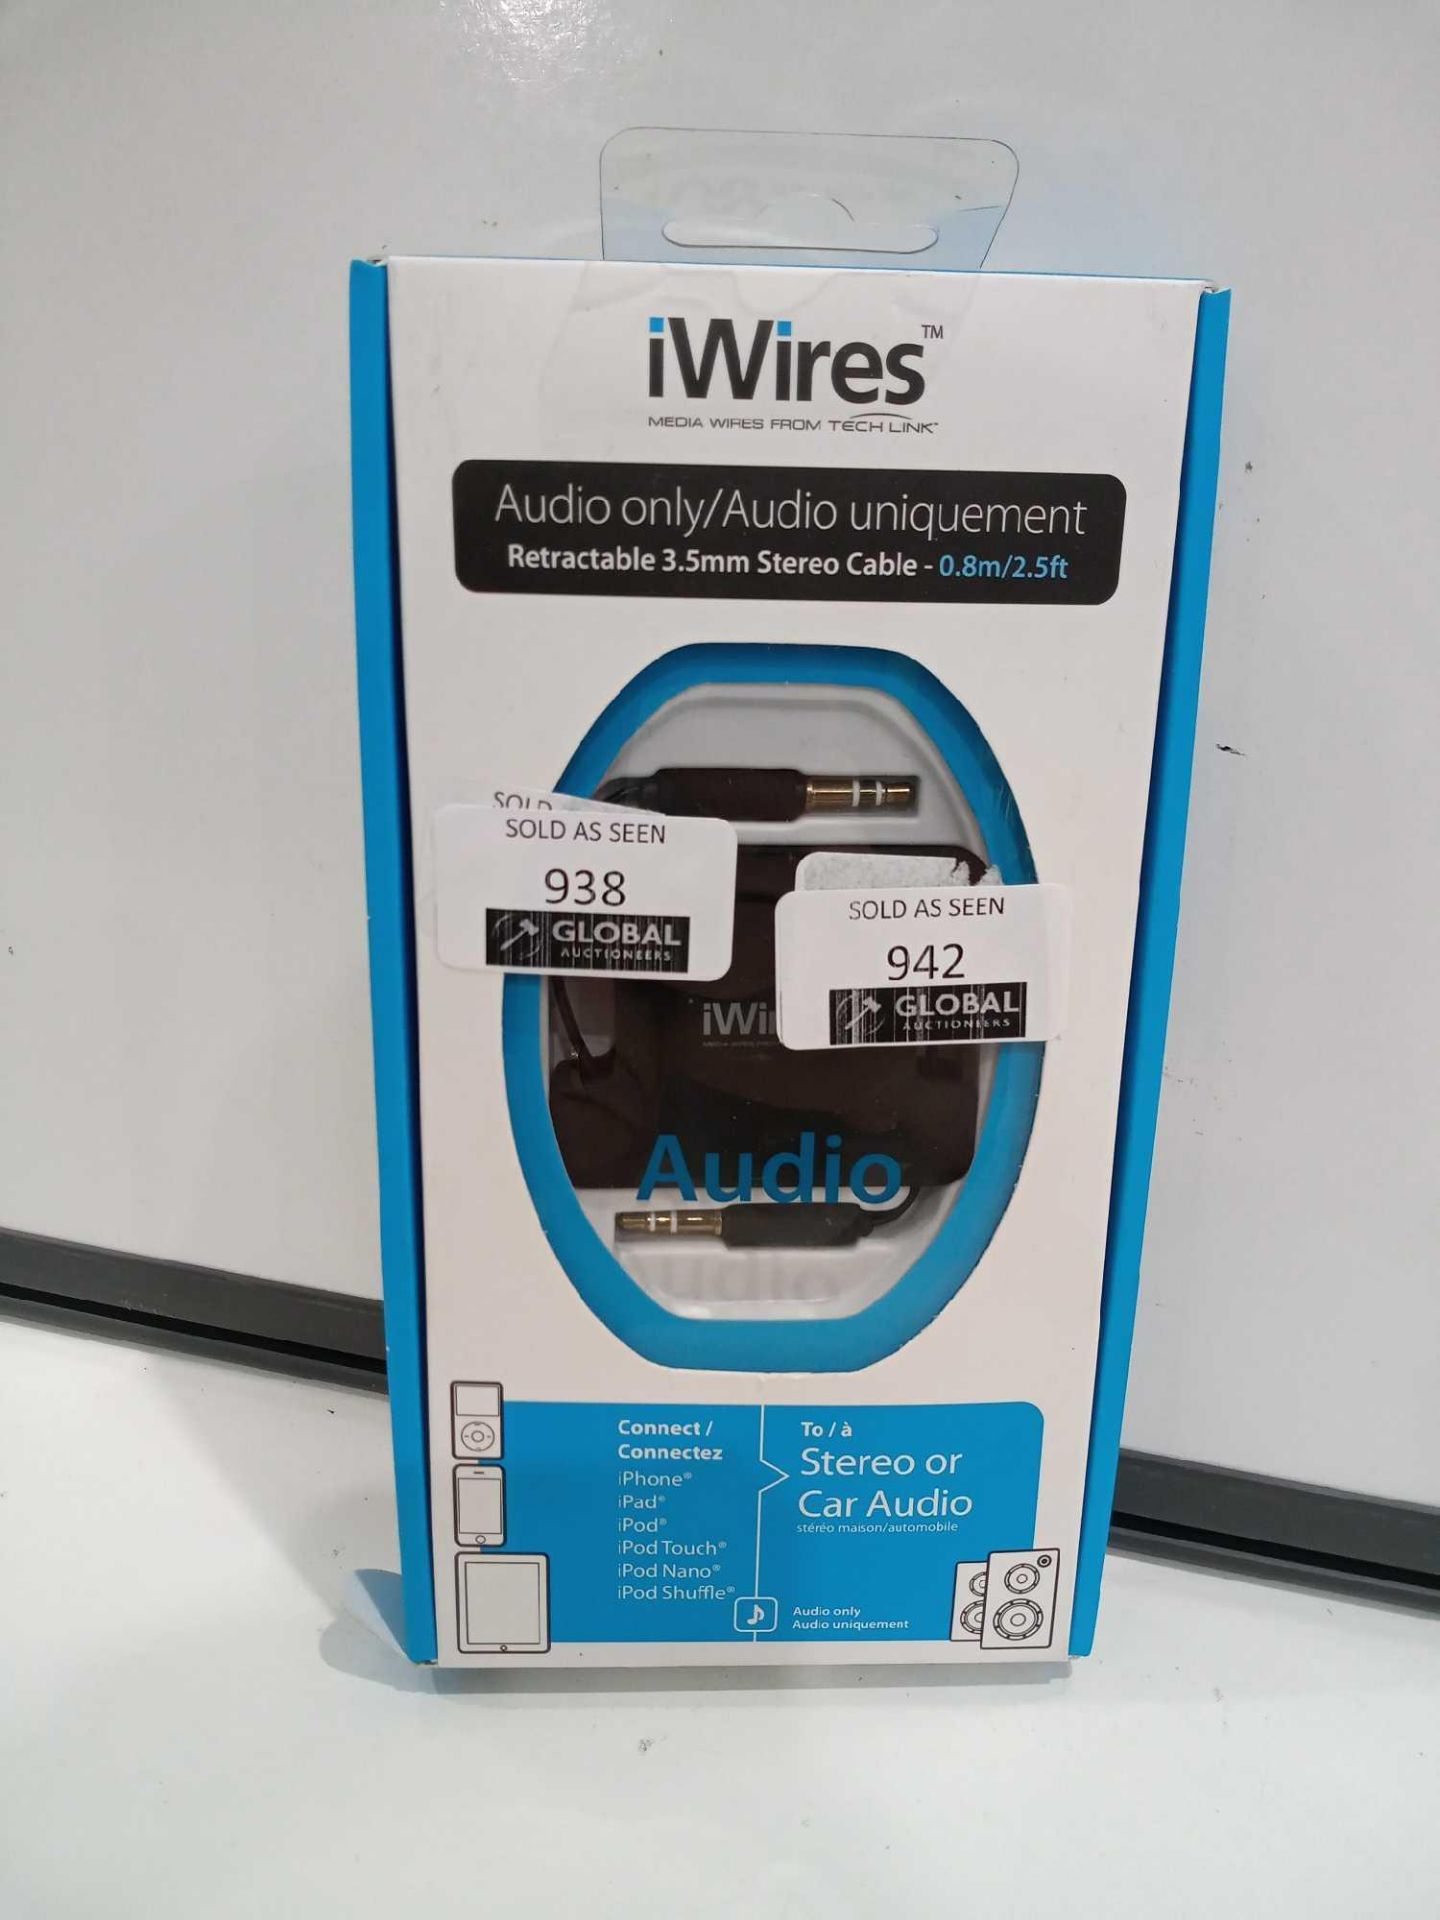 RRP £25 Boxed Brand New Iwires 3.5 Mm Retractable Stereo Cables